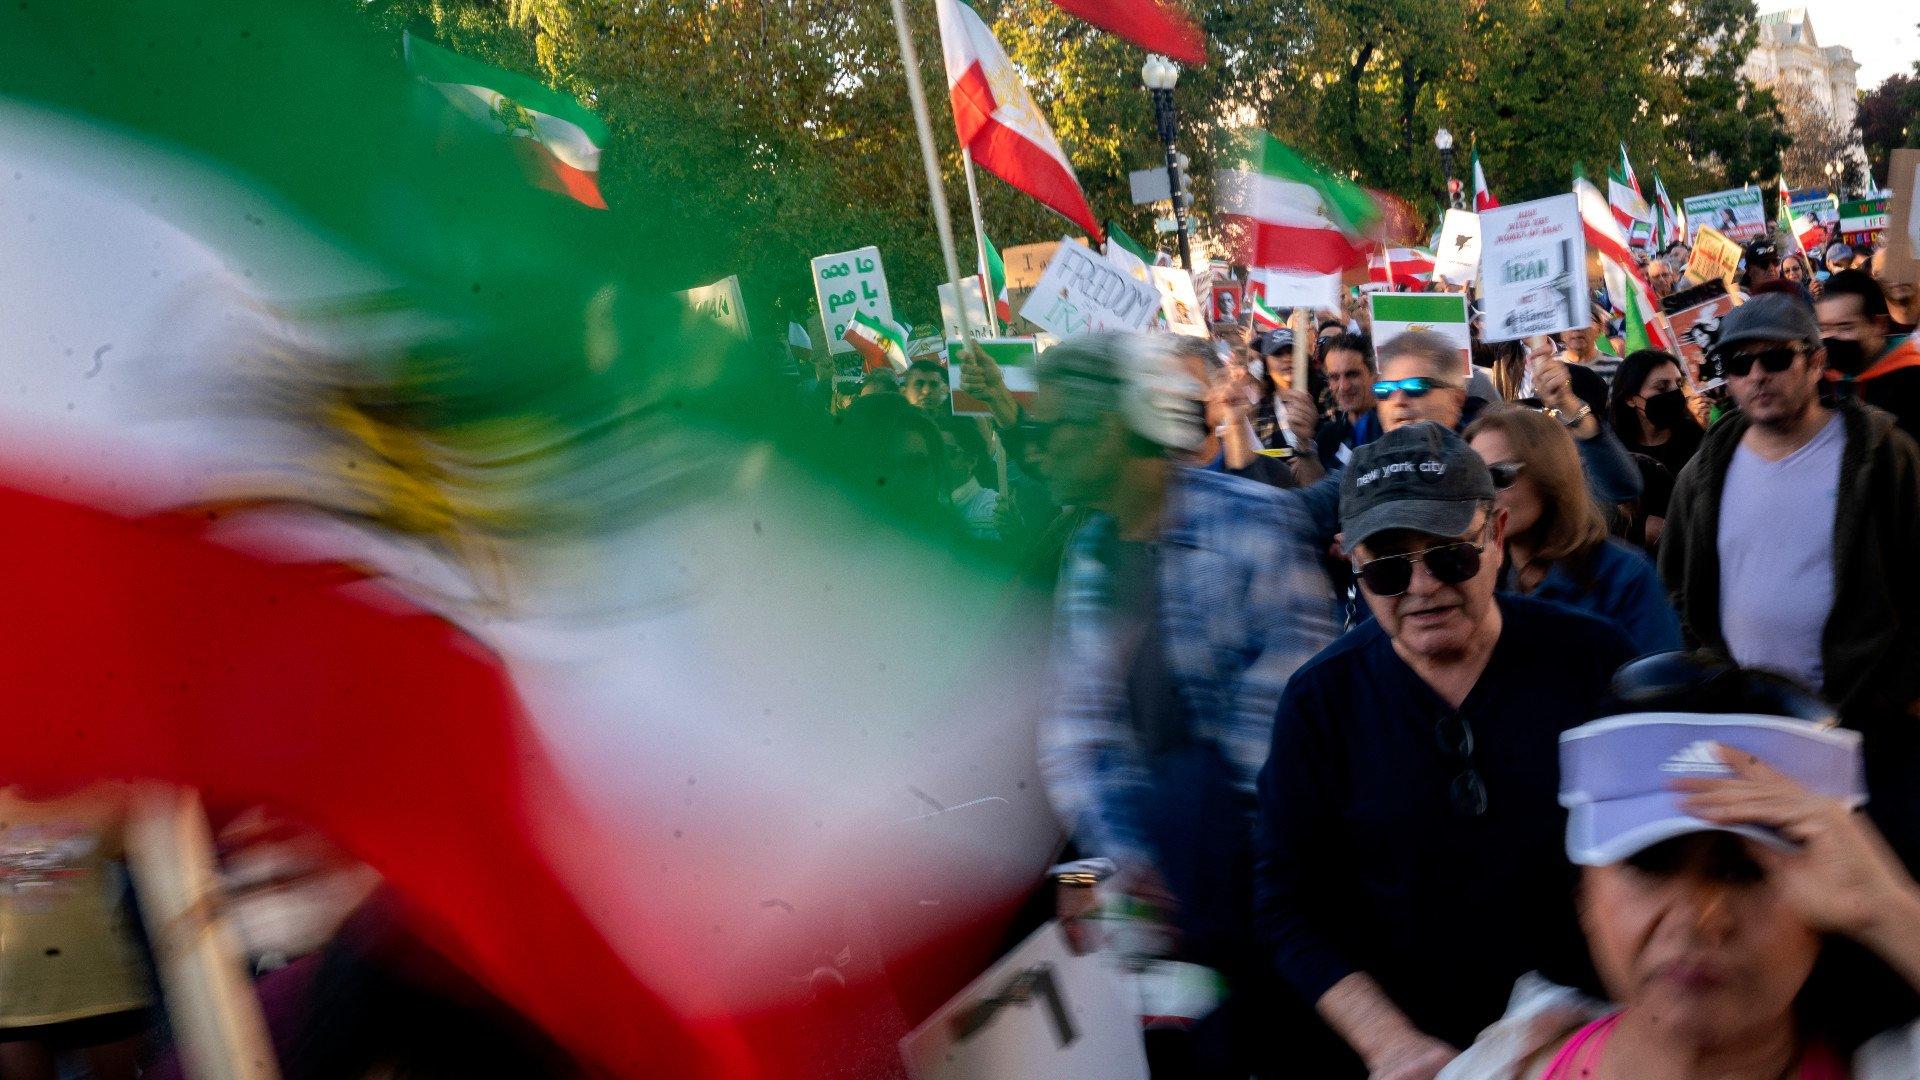 Demonstrators chant slogans and carry Iranian flags while marching during the "March of Solidarity for Iran" in Washington, DC, on 15 October, 2022 (AFP)